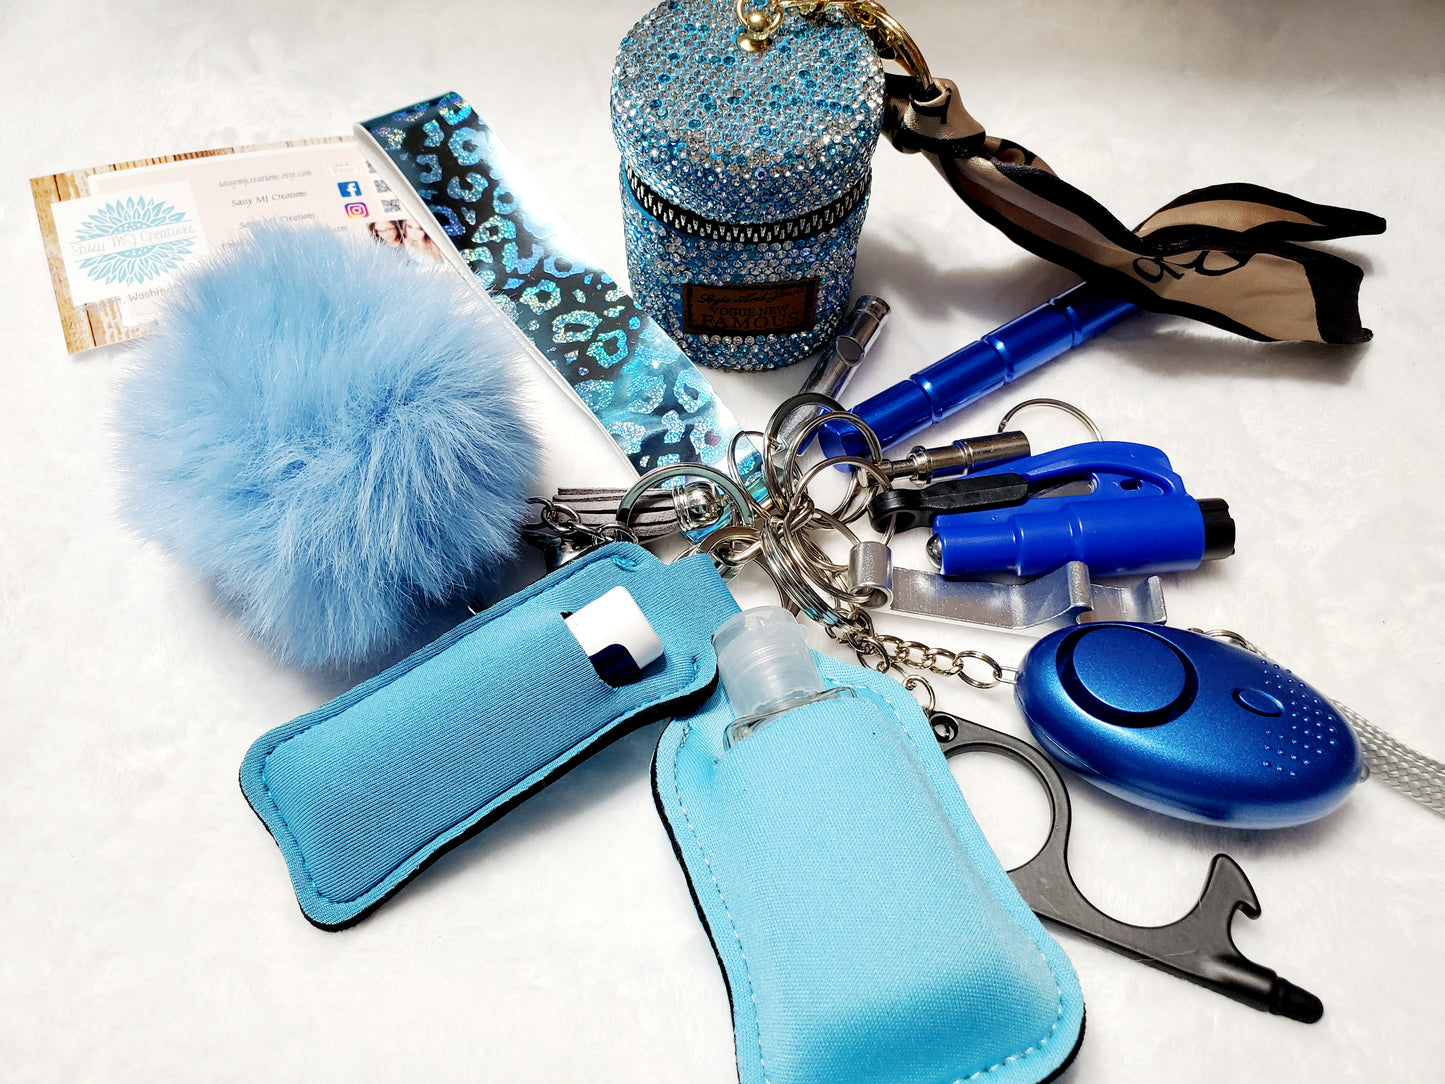 Blue Bling Set Safety Keychain-Personal Safety Kit 15 pc.